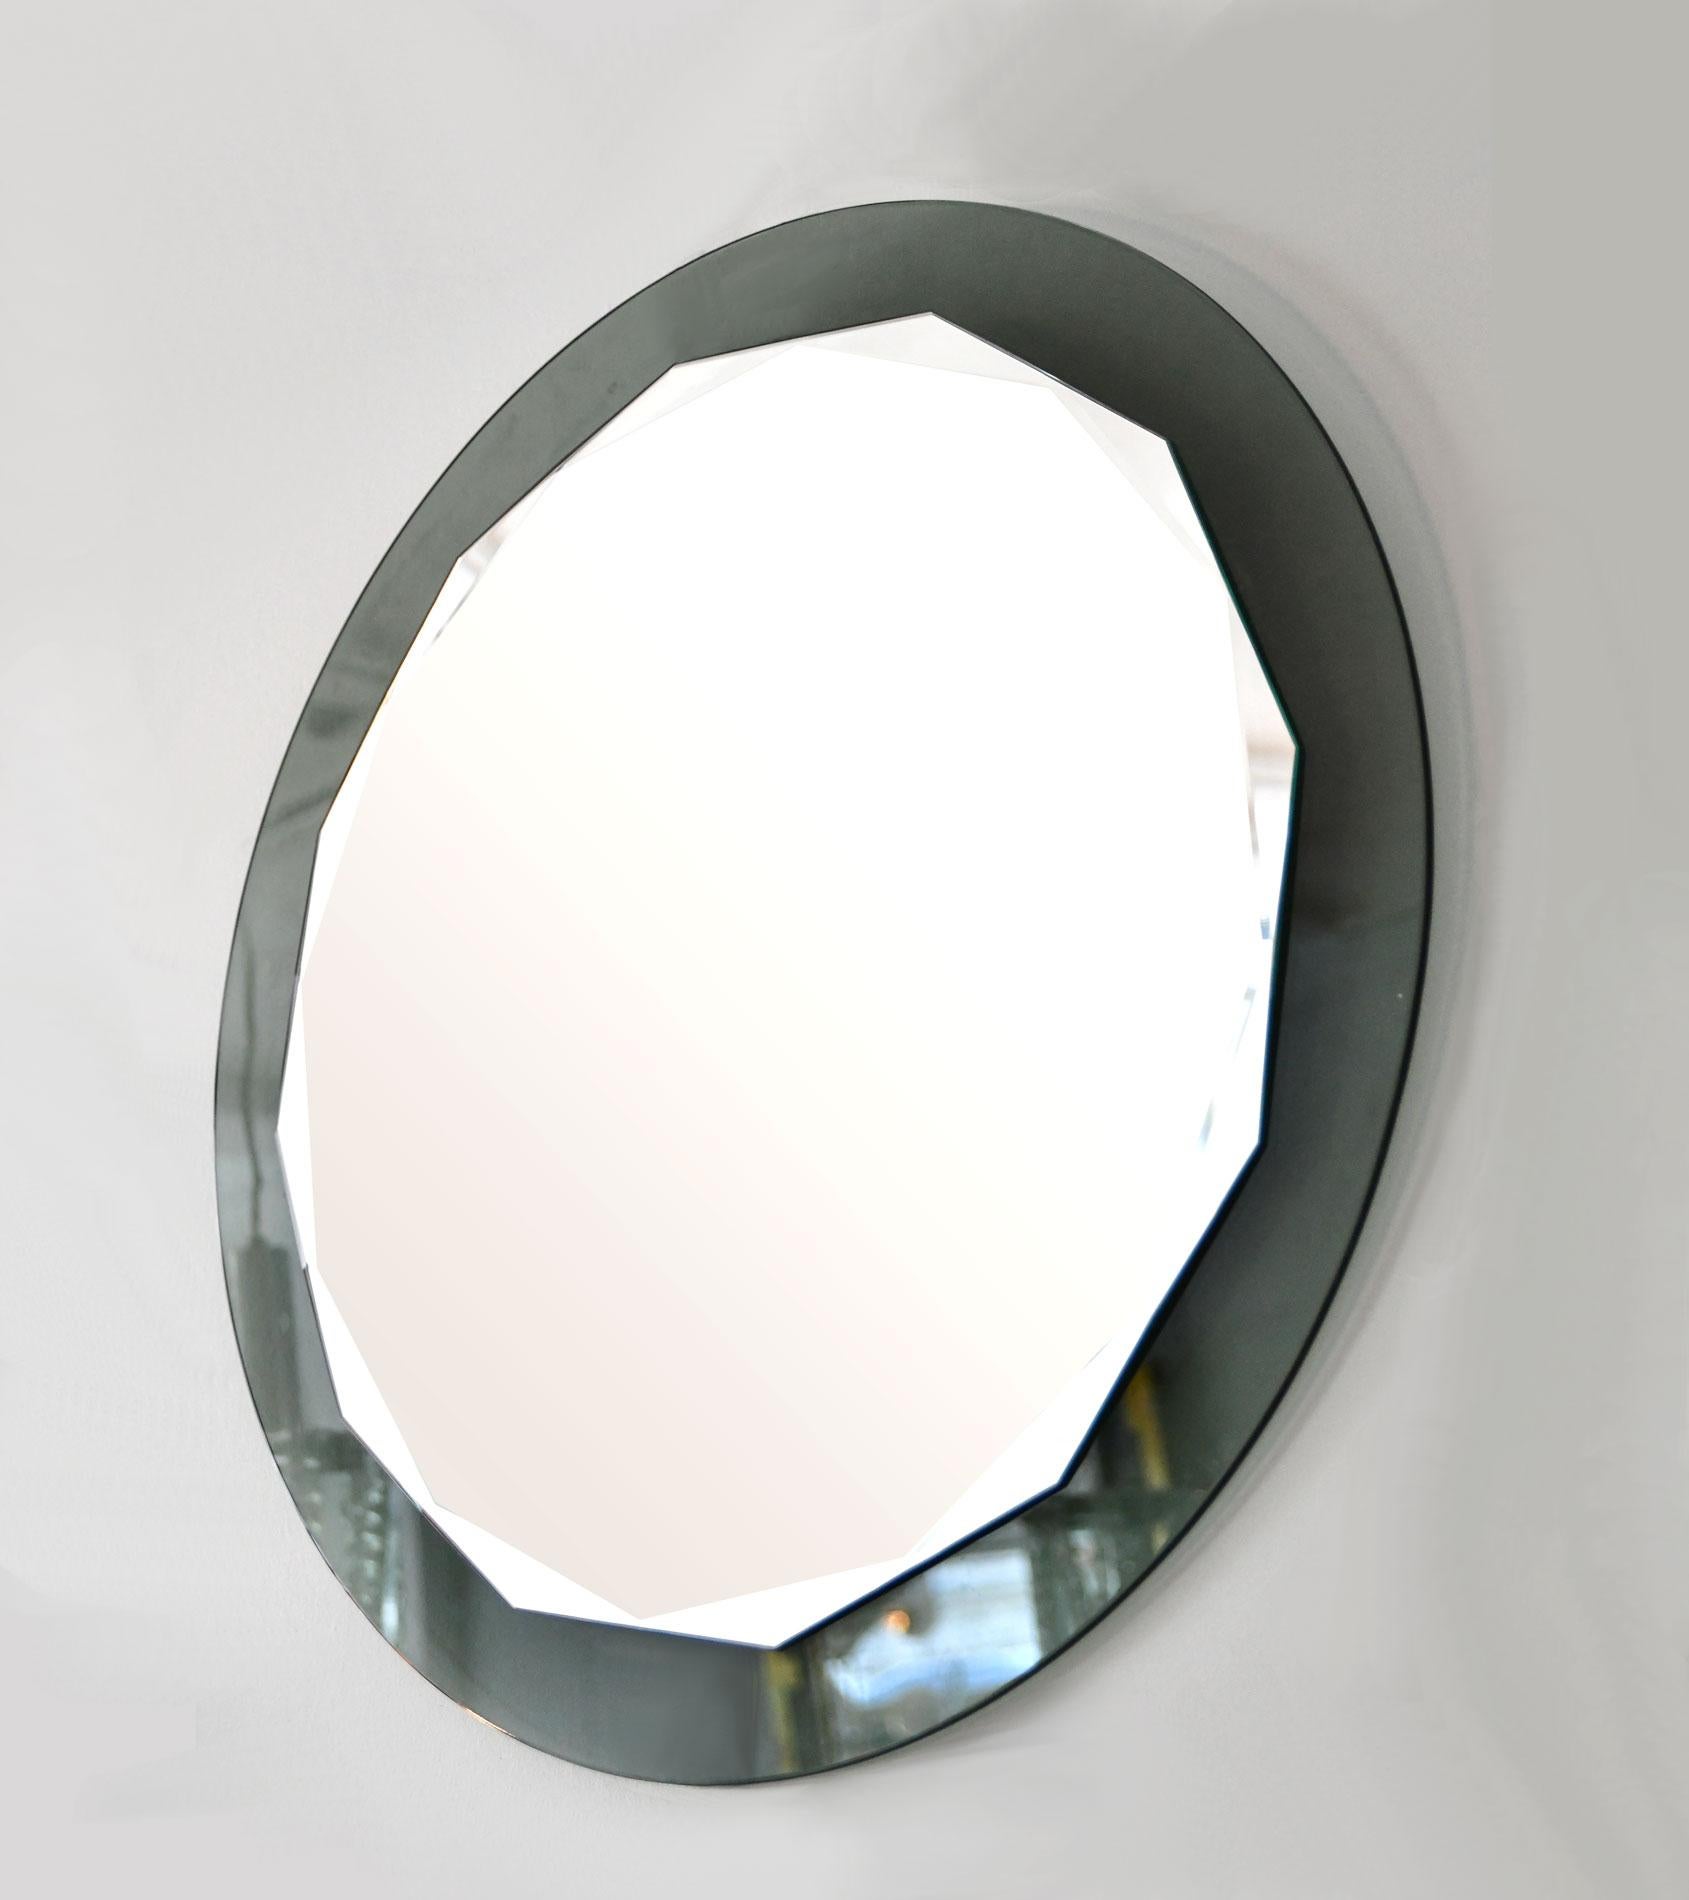 Beautiful wall mirror from the 1960s, made in Italy by Cristal Arte. Round, scalloped faceted mirror with smoked grey mirror backplate glass.